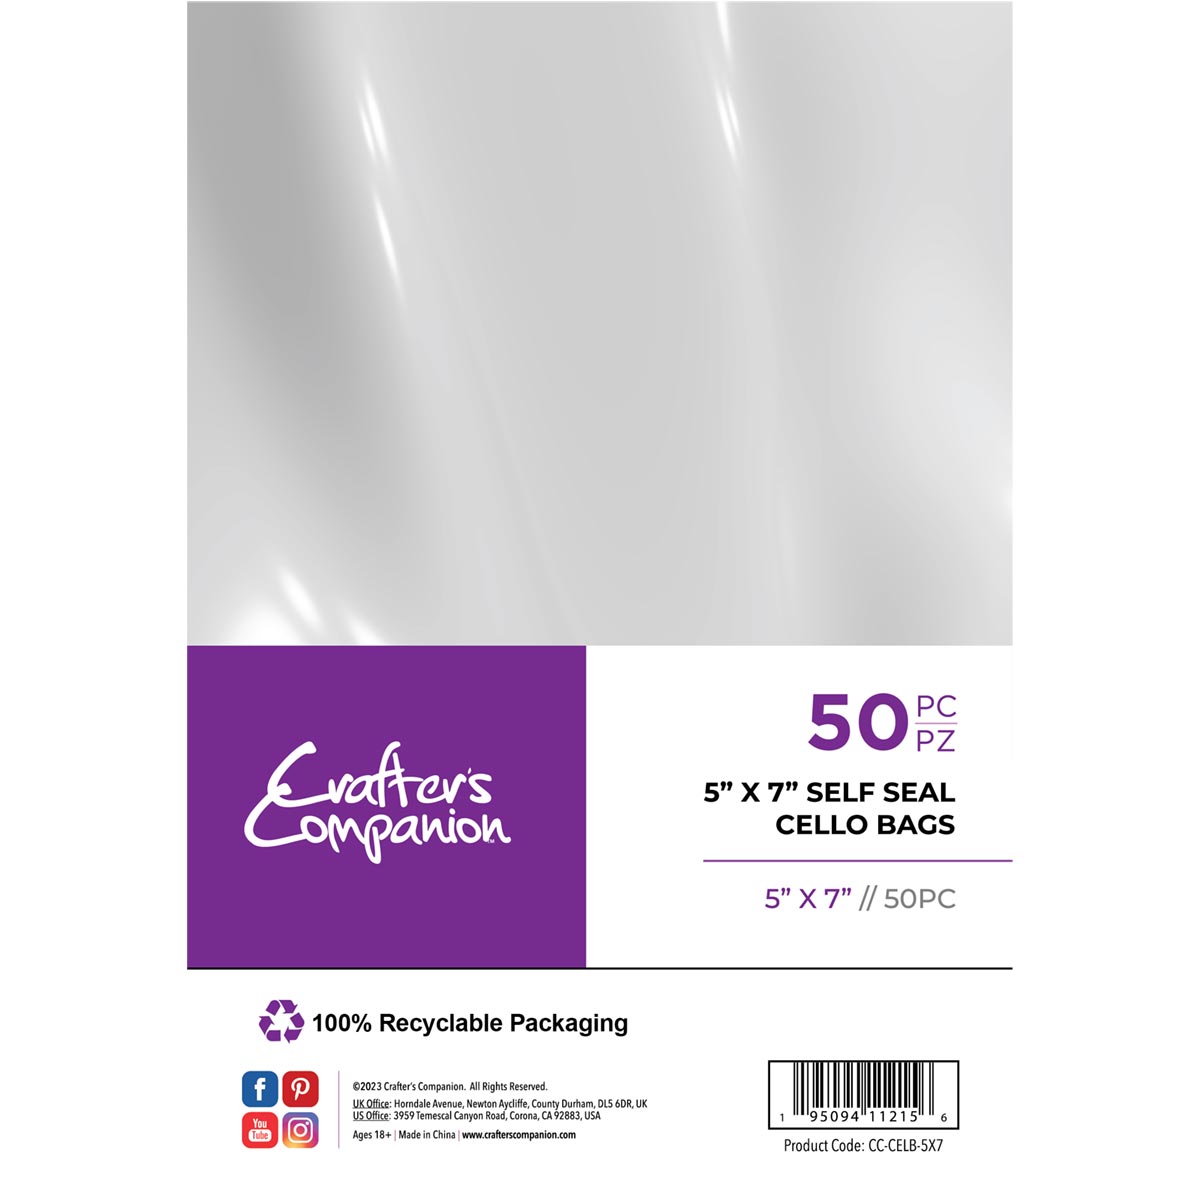 Crafter's Companion - Self Seal Cellophane Card Bags - 5" x 7" 50 pack